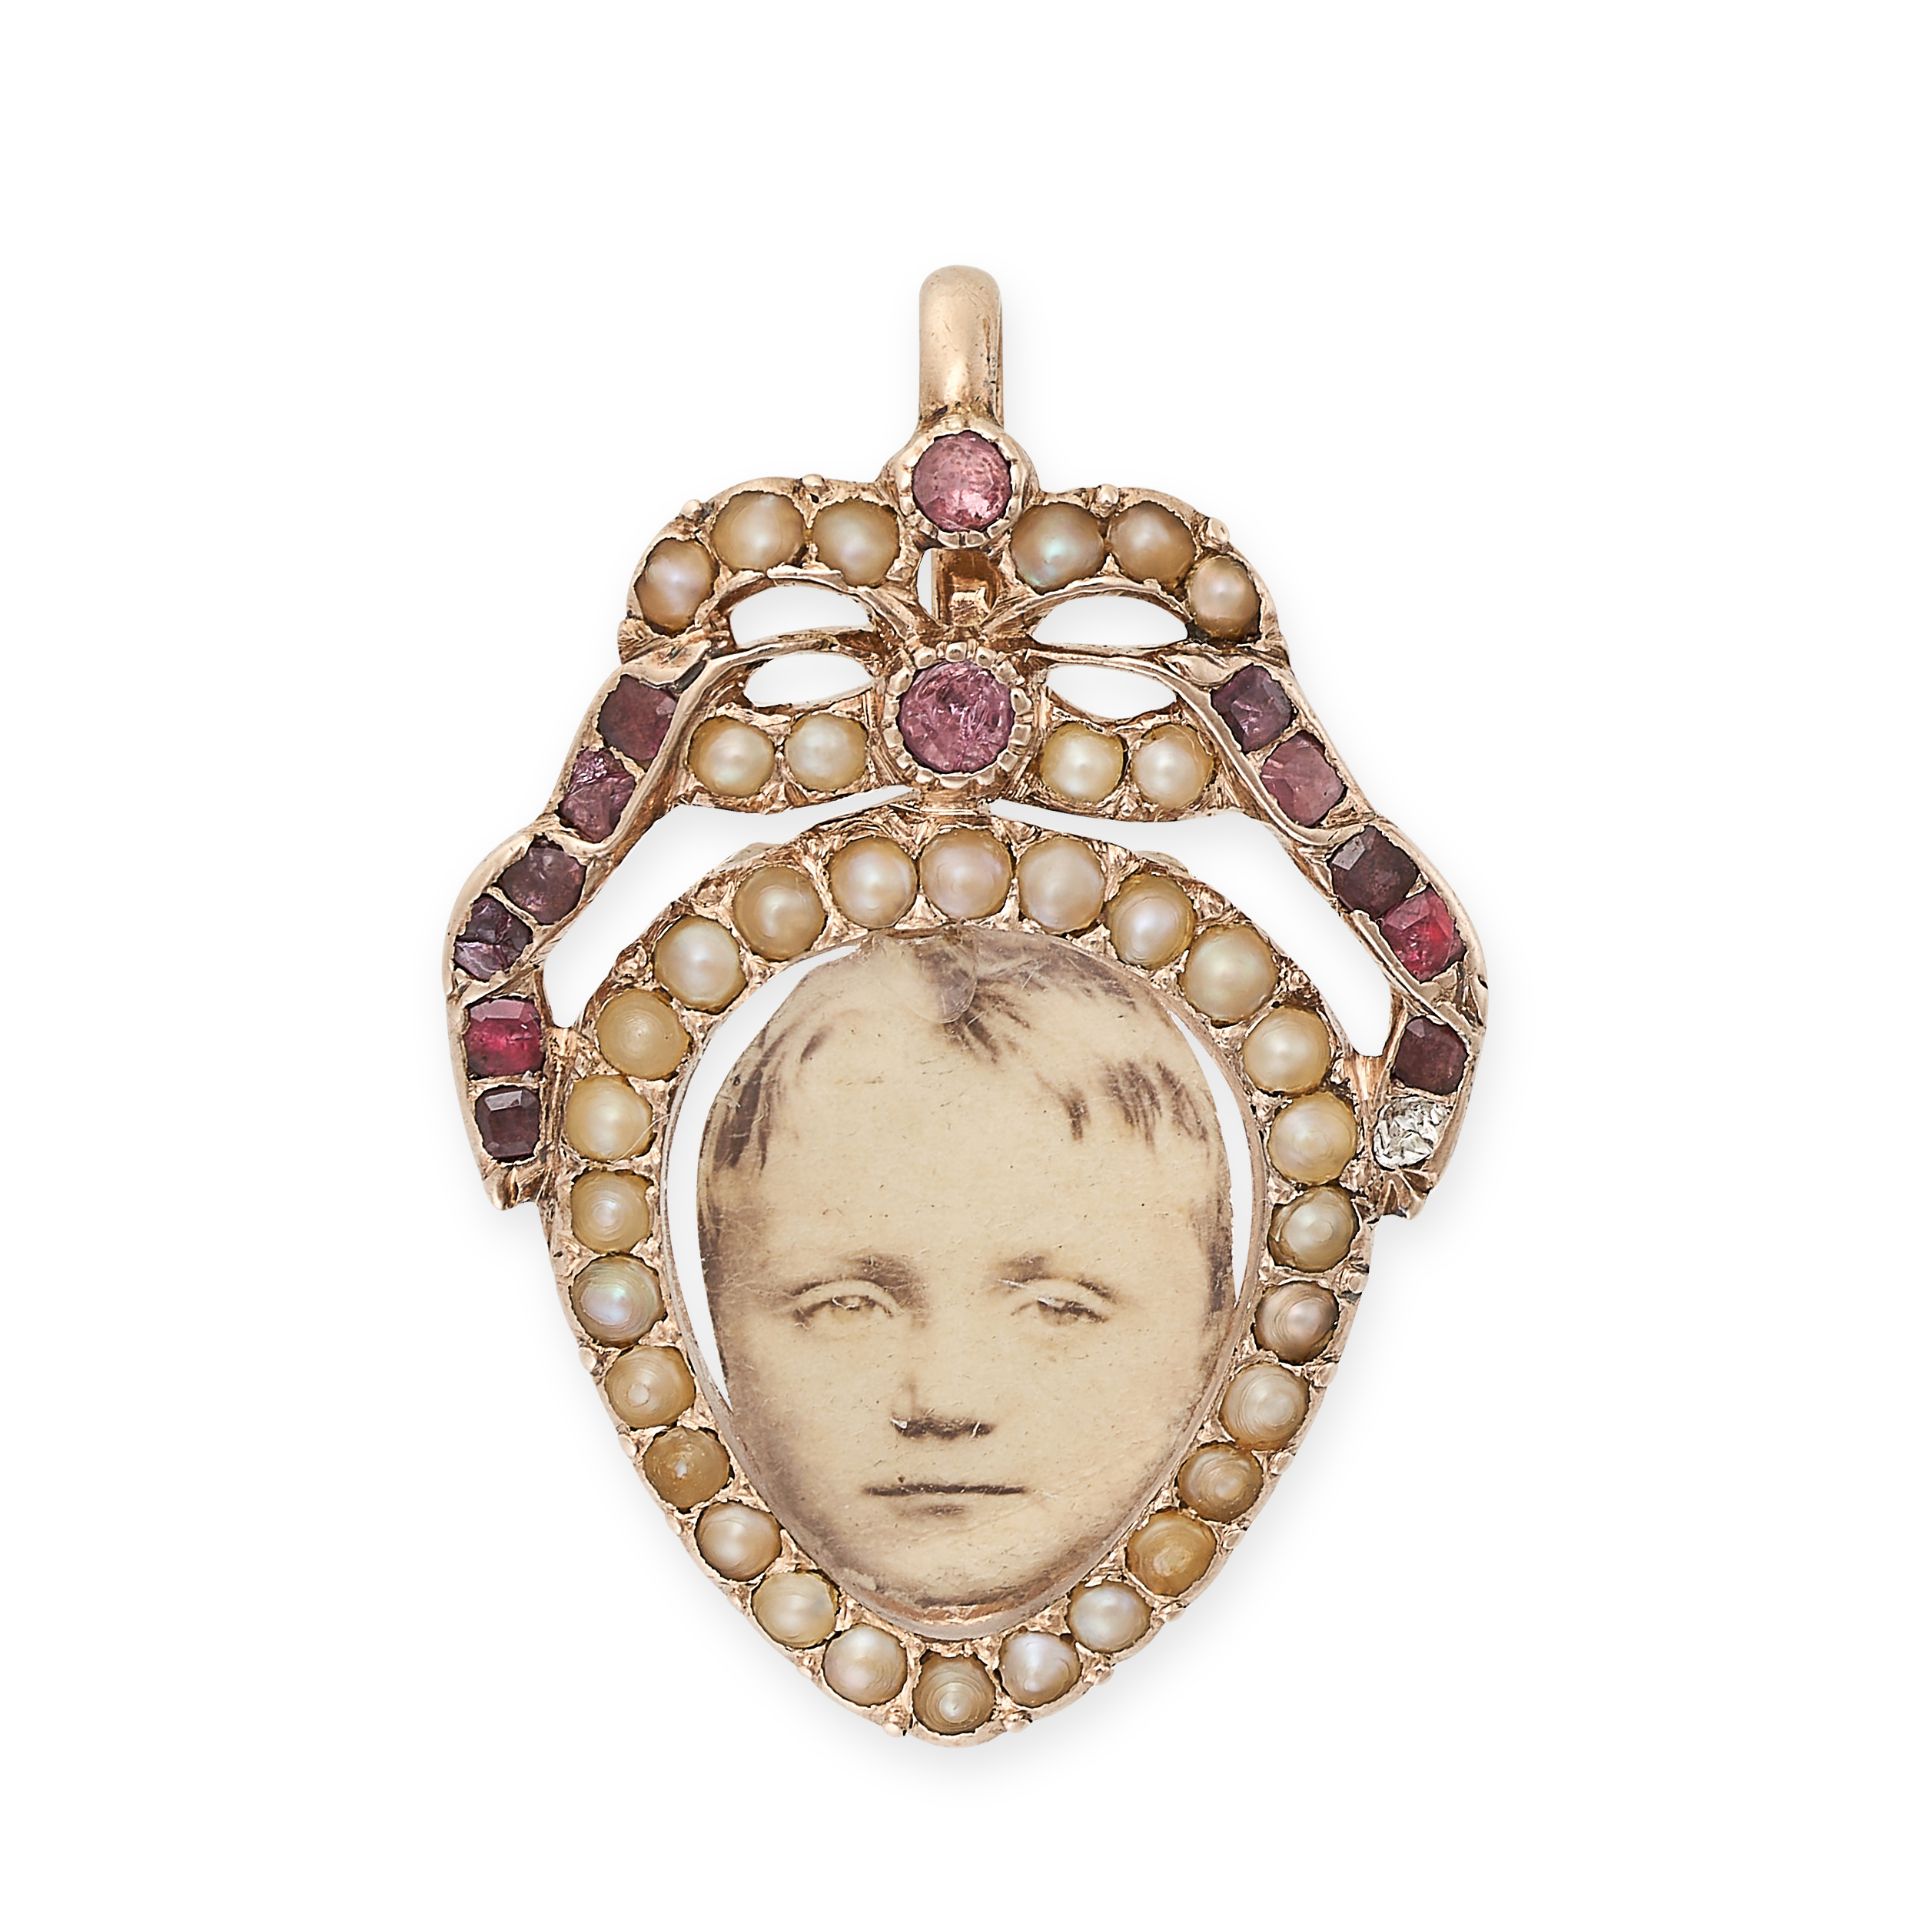 NO RESERVE - AN ANTIQUE GEORGE III PEARL AND GARNET LOCKET PENDANT, CIRCA 1780 in yellow gold, the